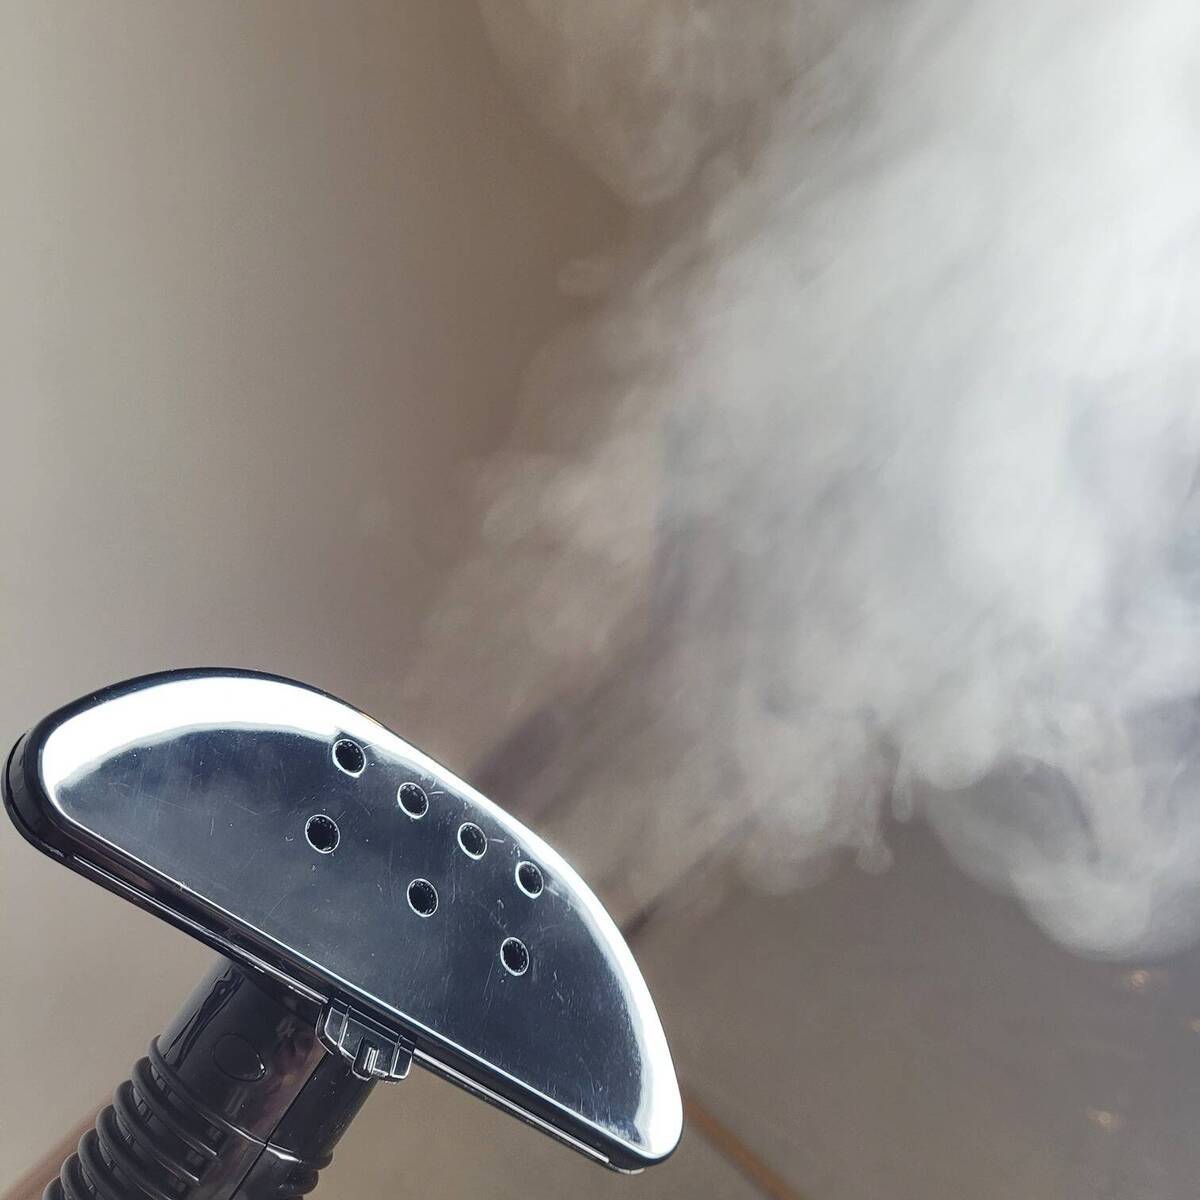 photo of a steamer emitting hot white steam into the air